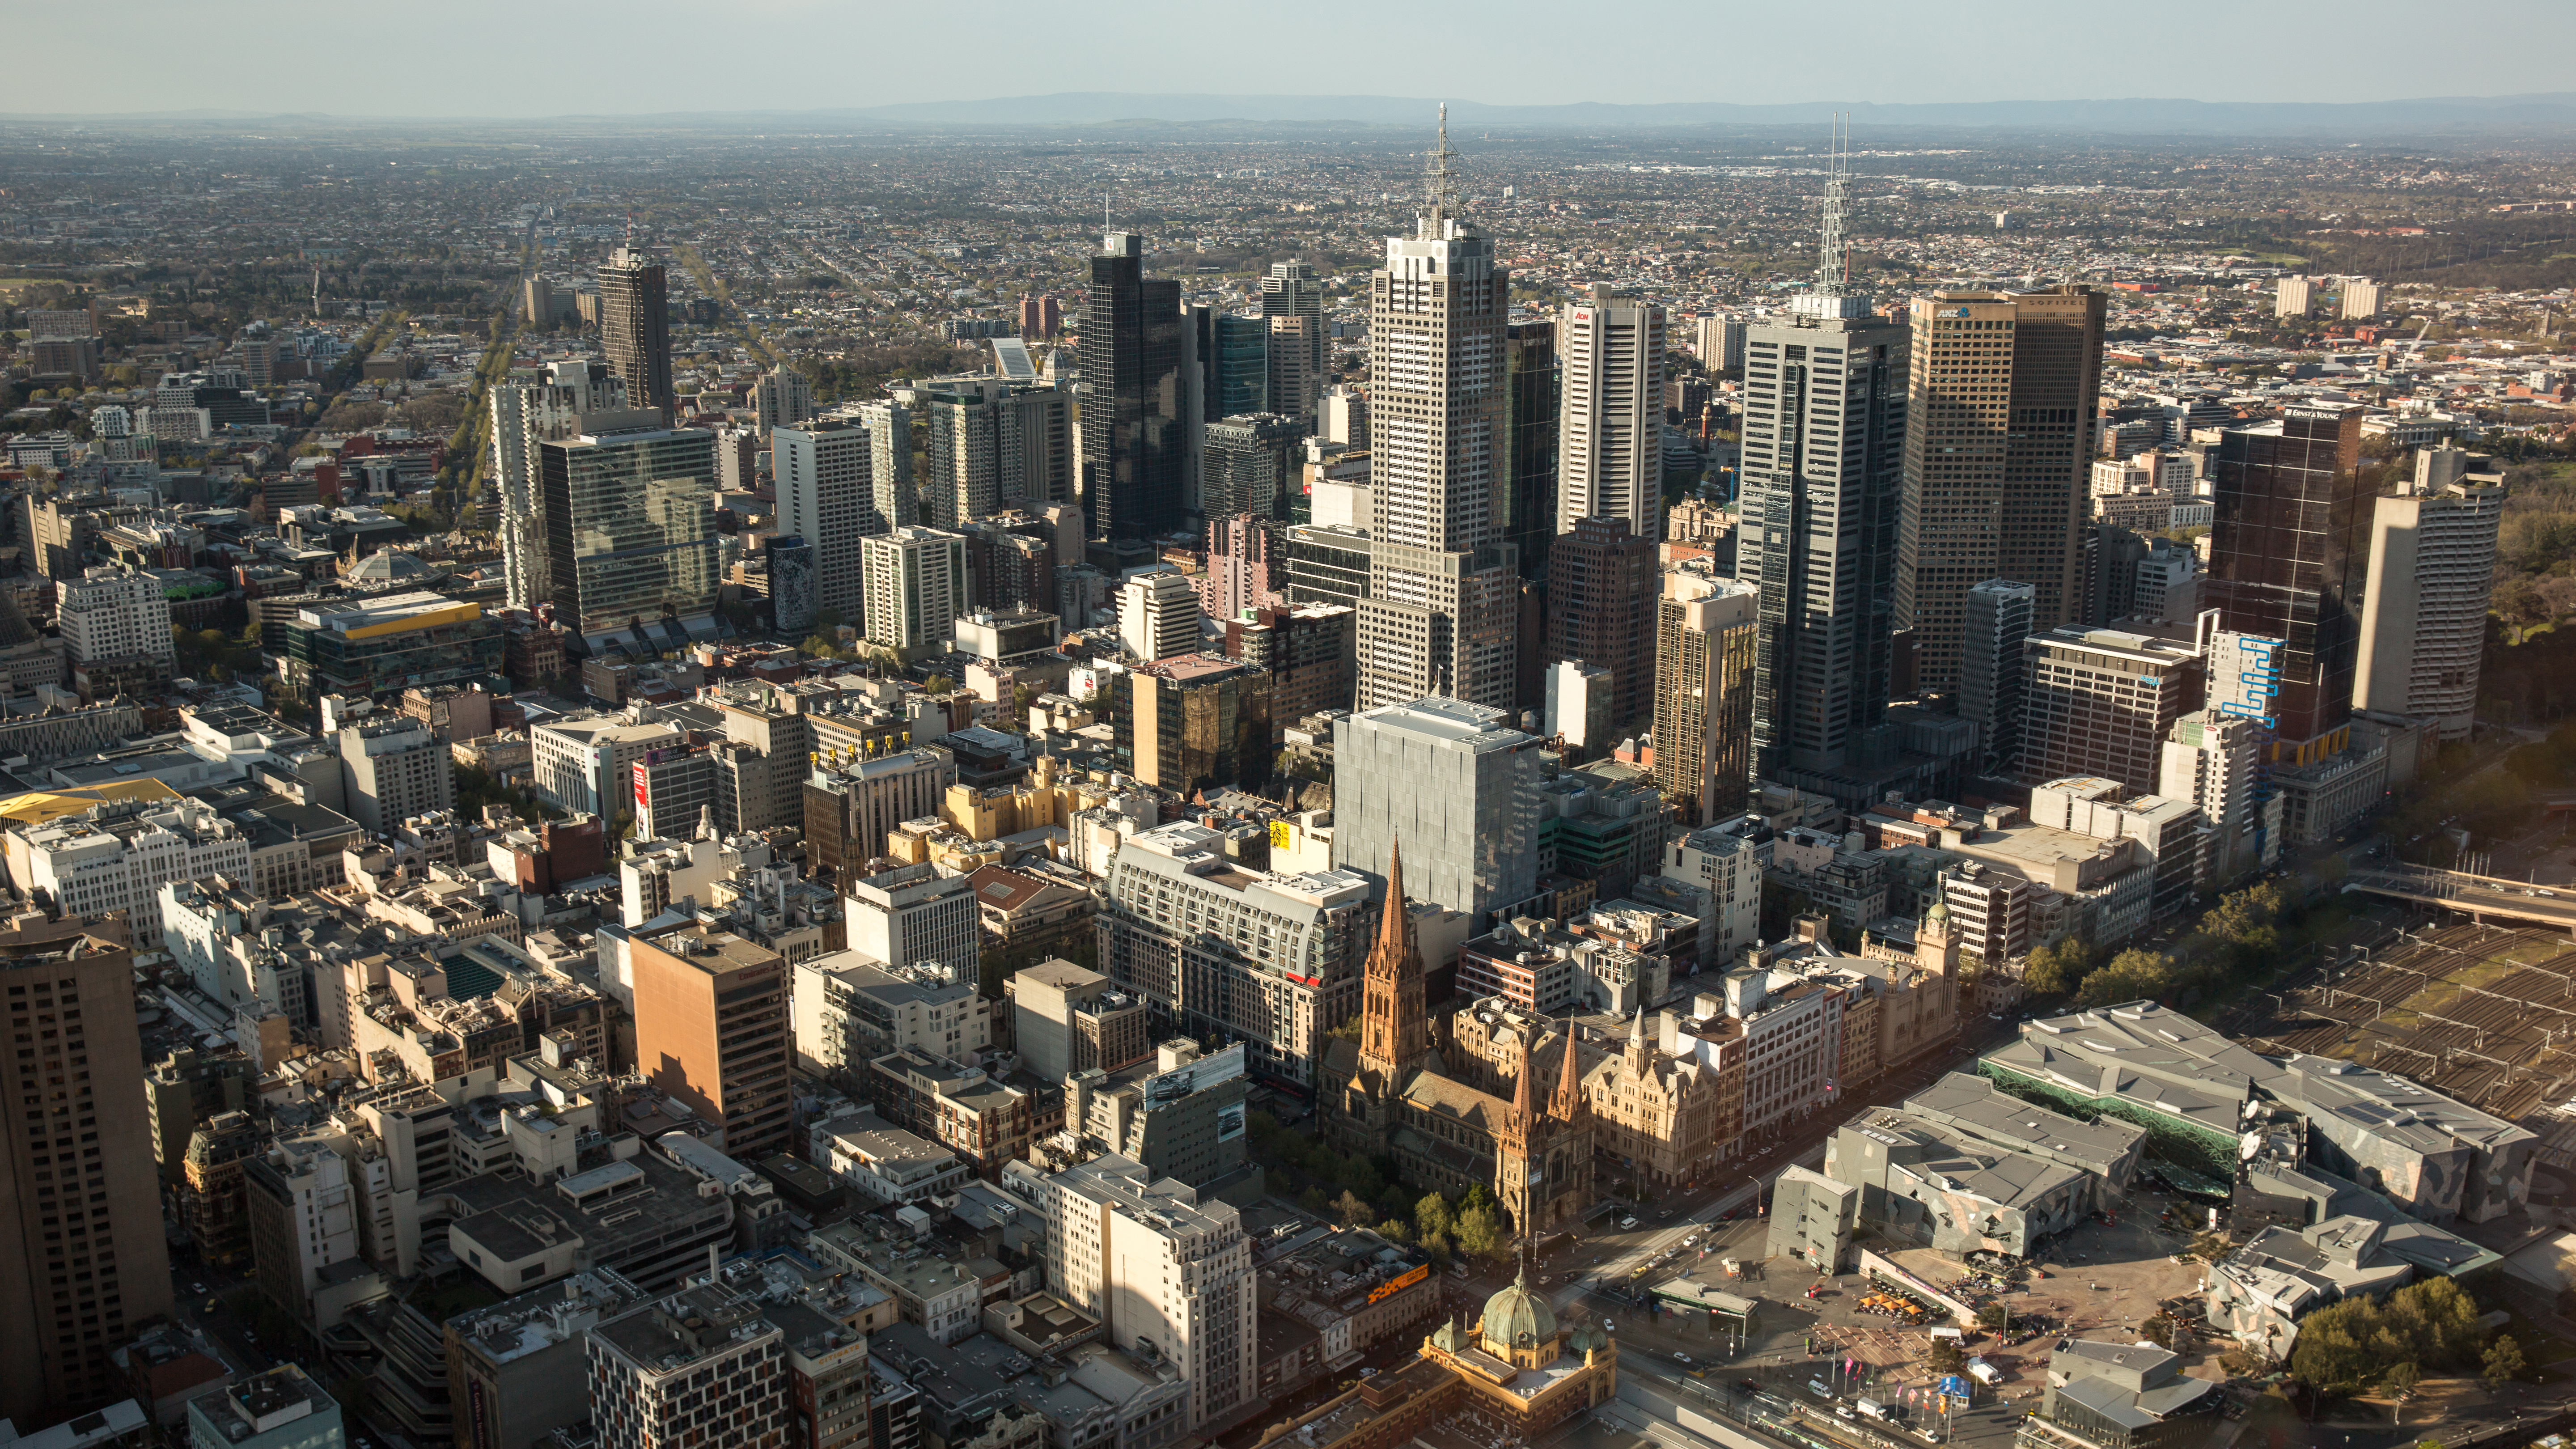 Melbourne, Australia - September 25: View of the Central Business District in Melbourne, Australia on September 25, 2014.; Shutterstock ID 254807707; purchase_order: NA; job: Property Journal Feb 22; client: RICS; other: 